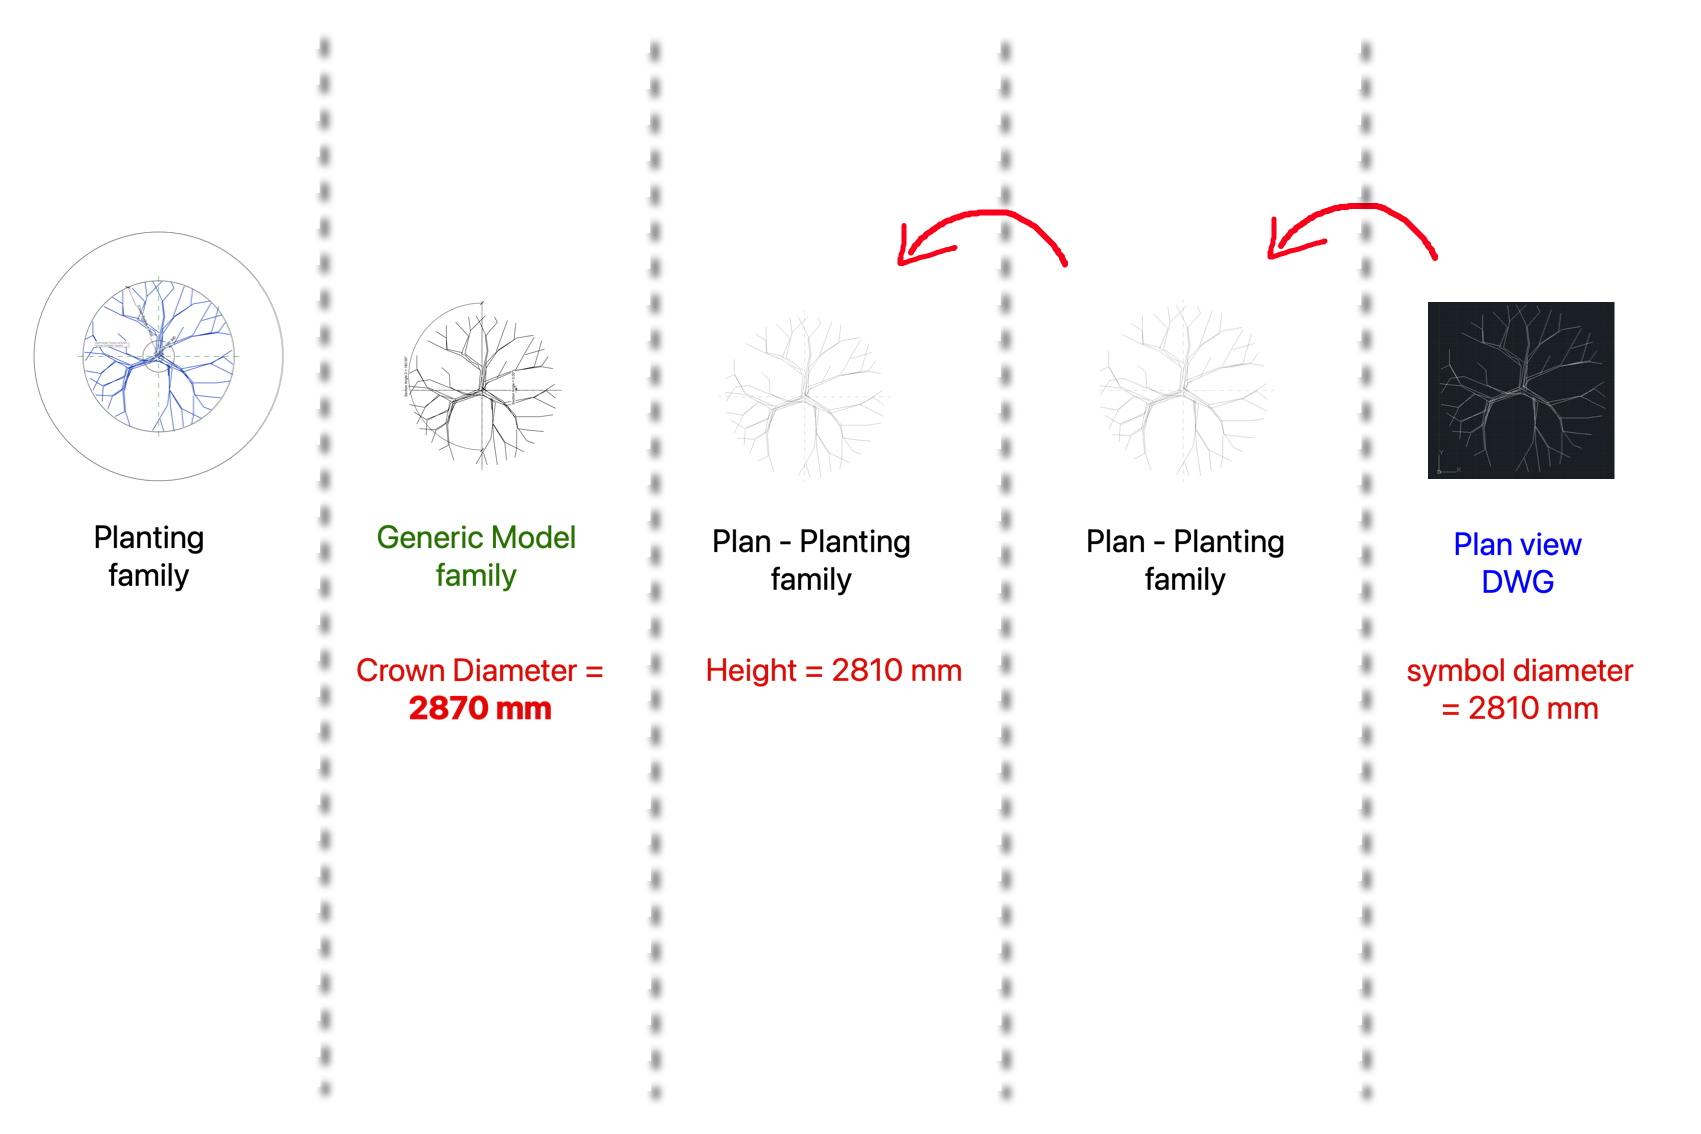 Diagram showing the relationship between an image of a Plan View DWG at 2810mm, Plan - planting family (height at 2810mm), generic model (crown diameter at 2870mm. Edit type of inserted plant family and path the 